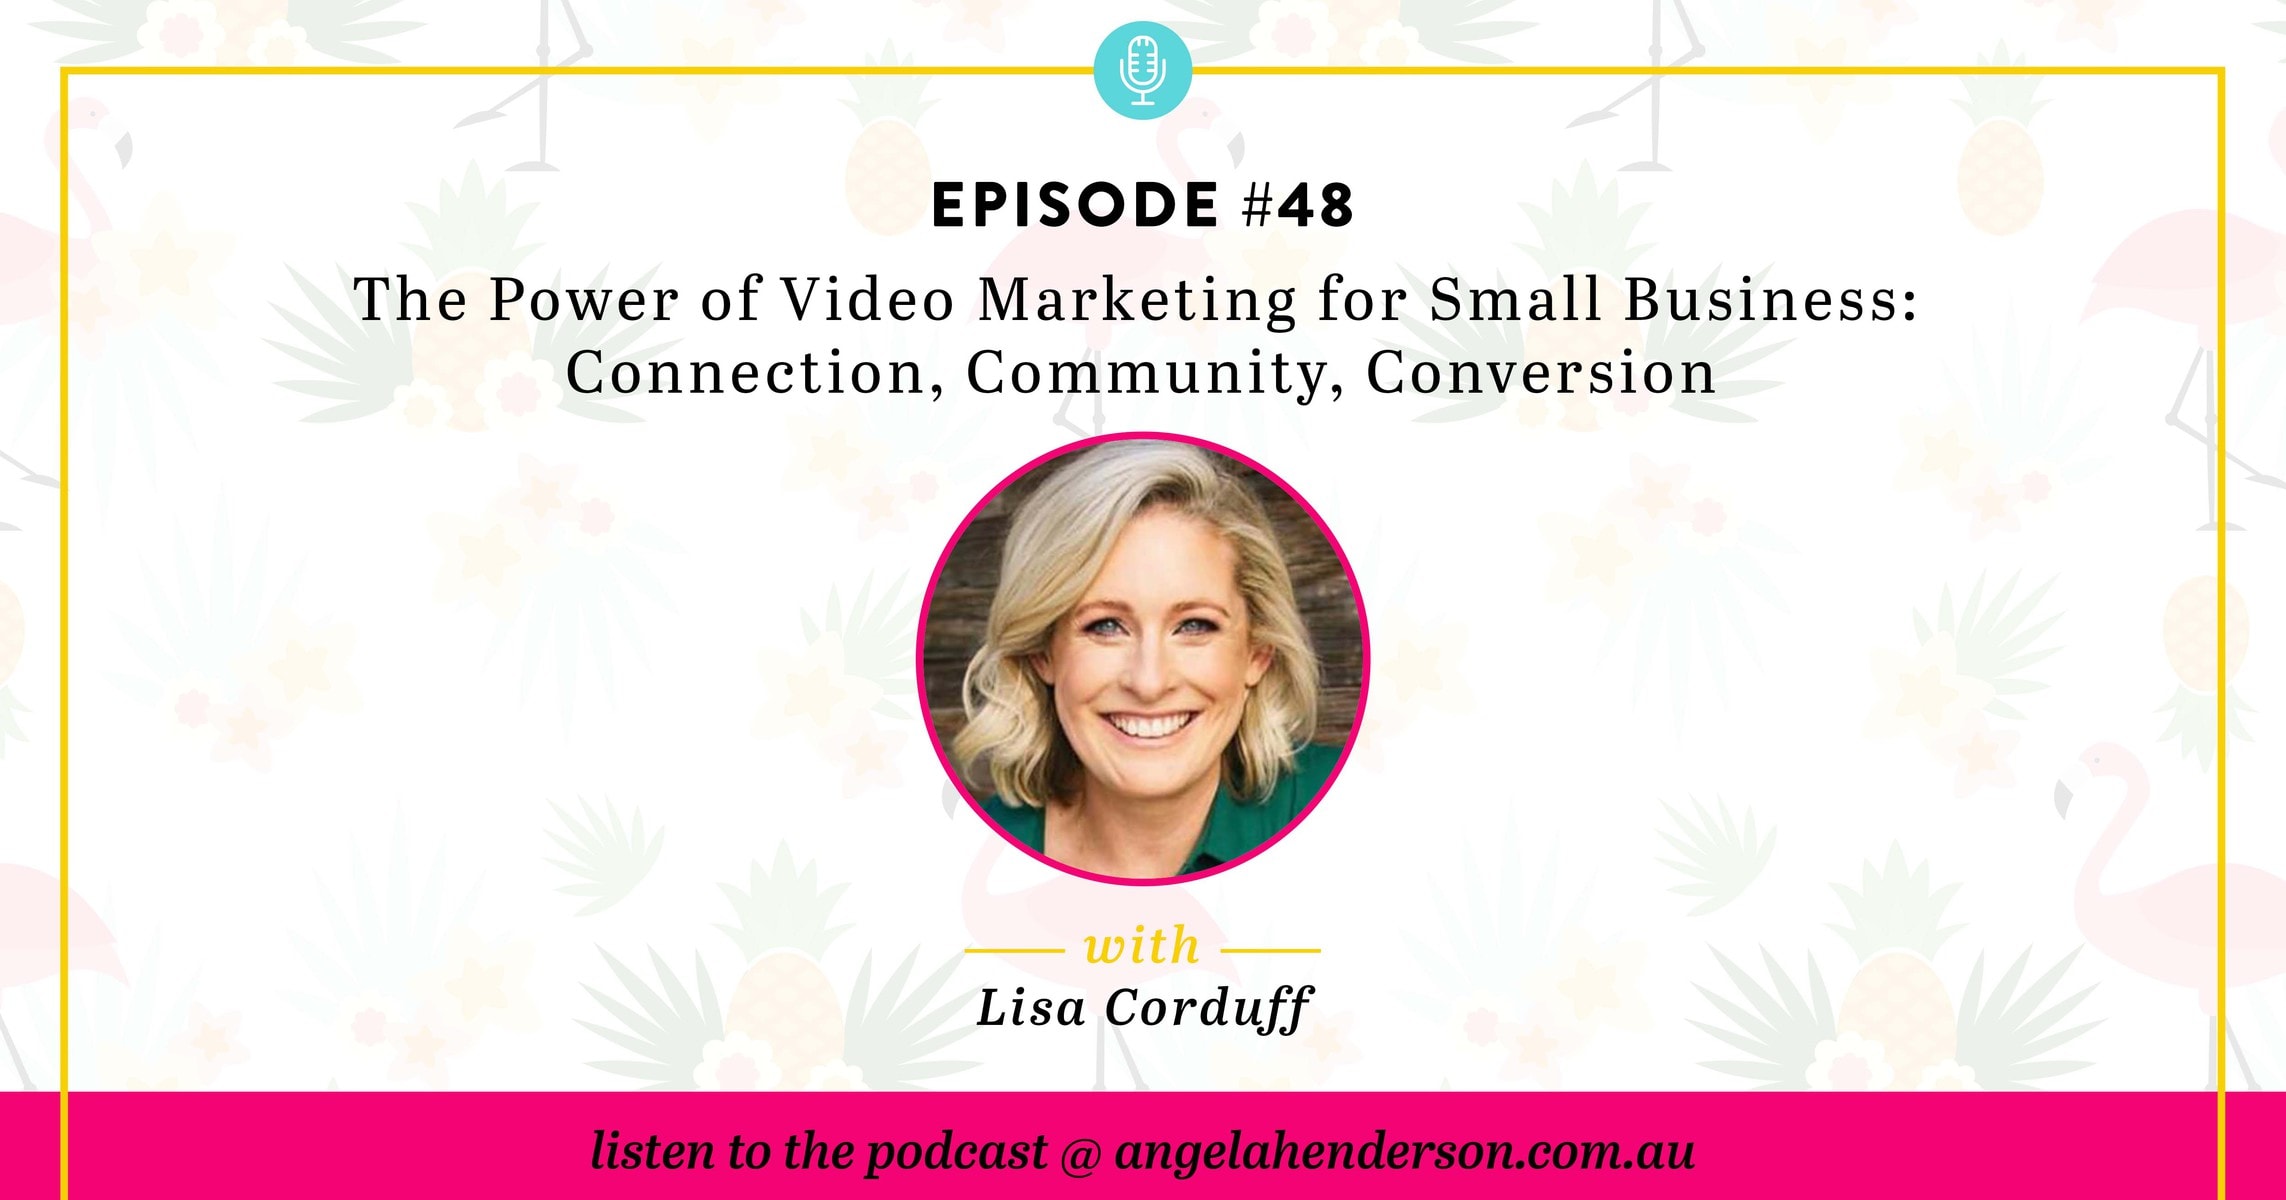 The Power of Video Marketing for Small Business